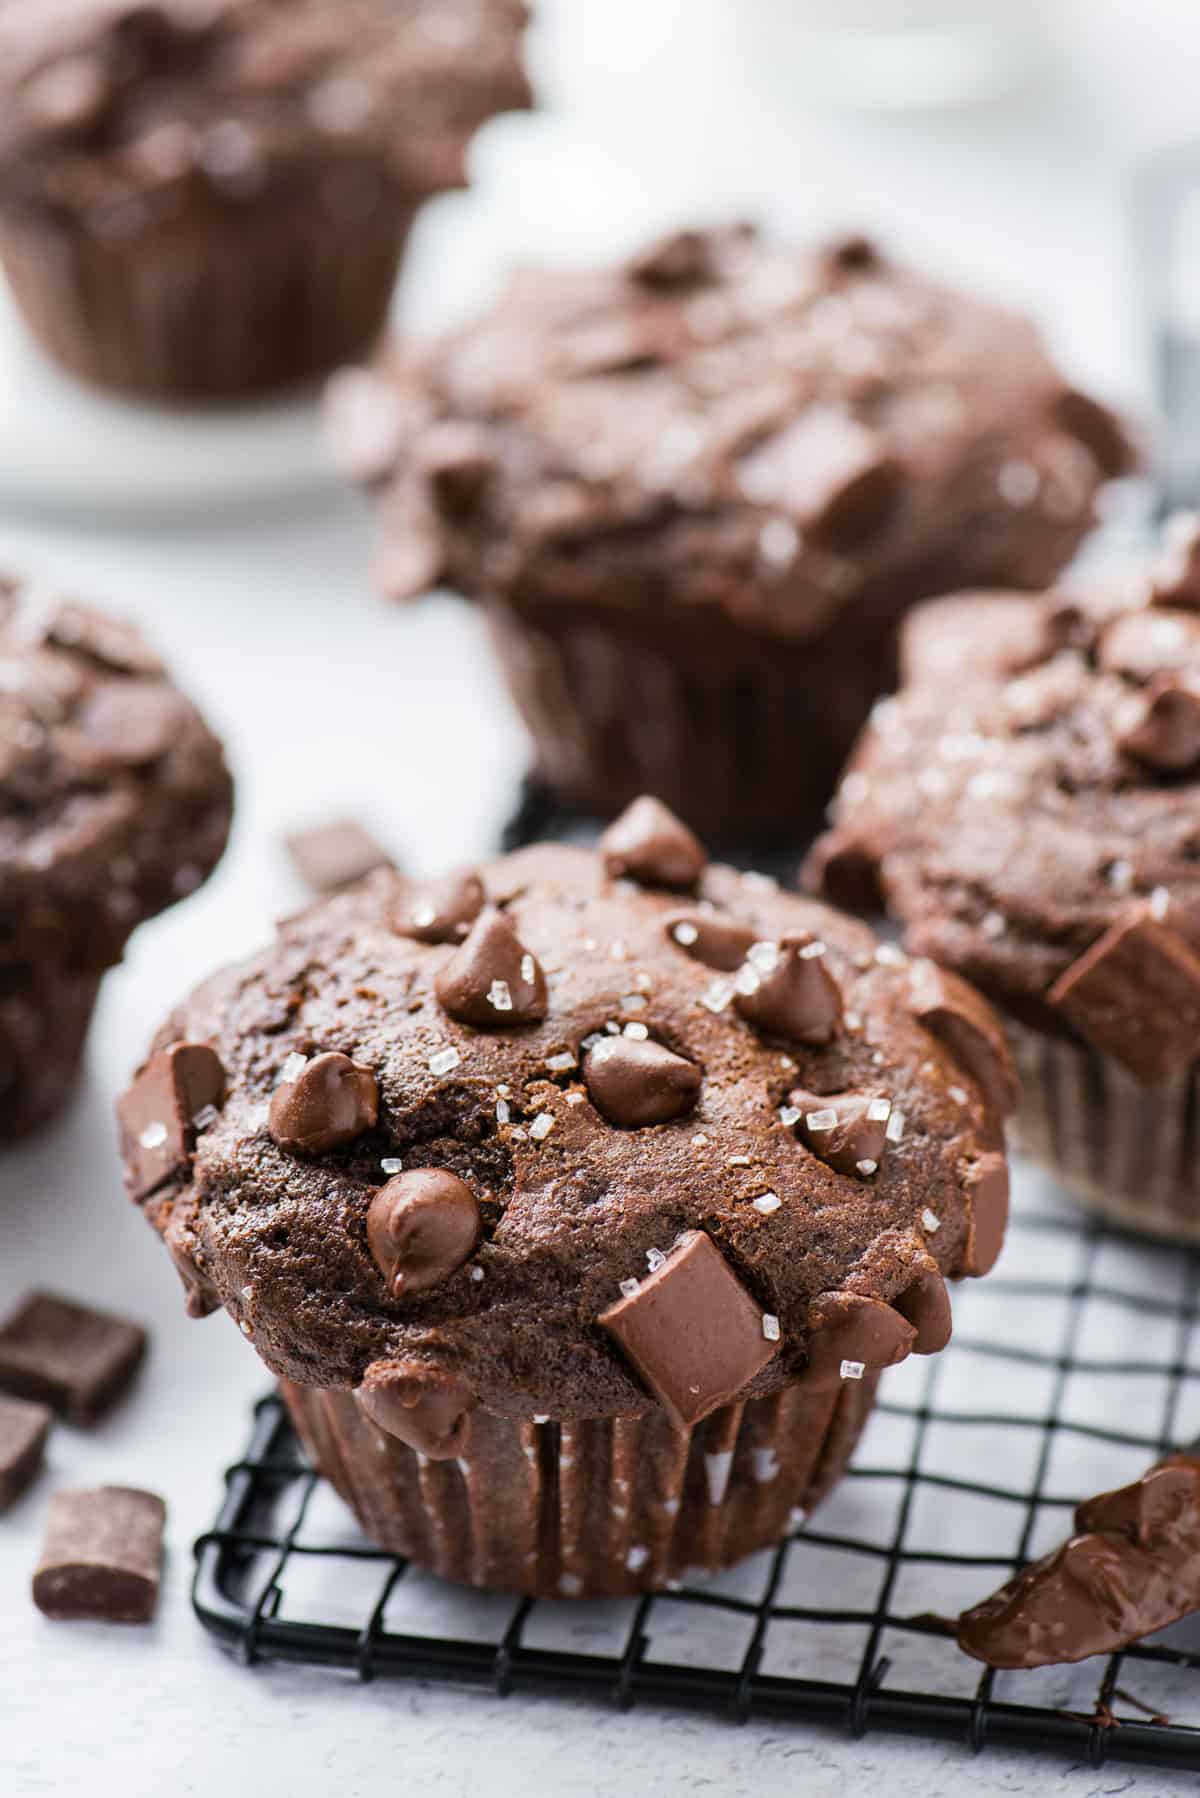 chocolate muffin on black wire rack with more muffins in the background